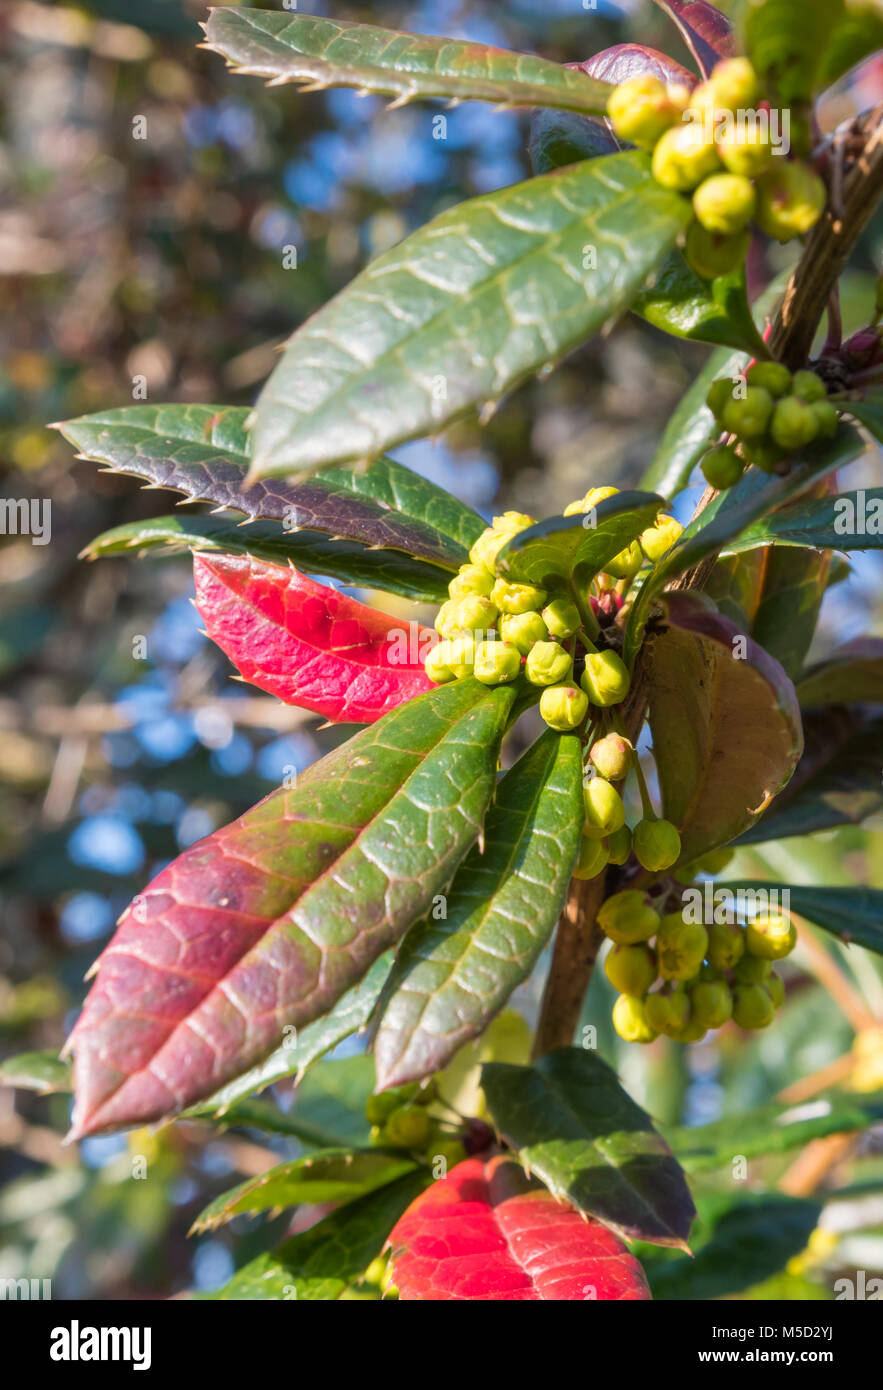 Berberis julianae, an ornamental evergreen Barberry with small yellow flowers growing in Winter in Southern England, UK. Portrait. Stock Photo